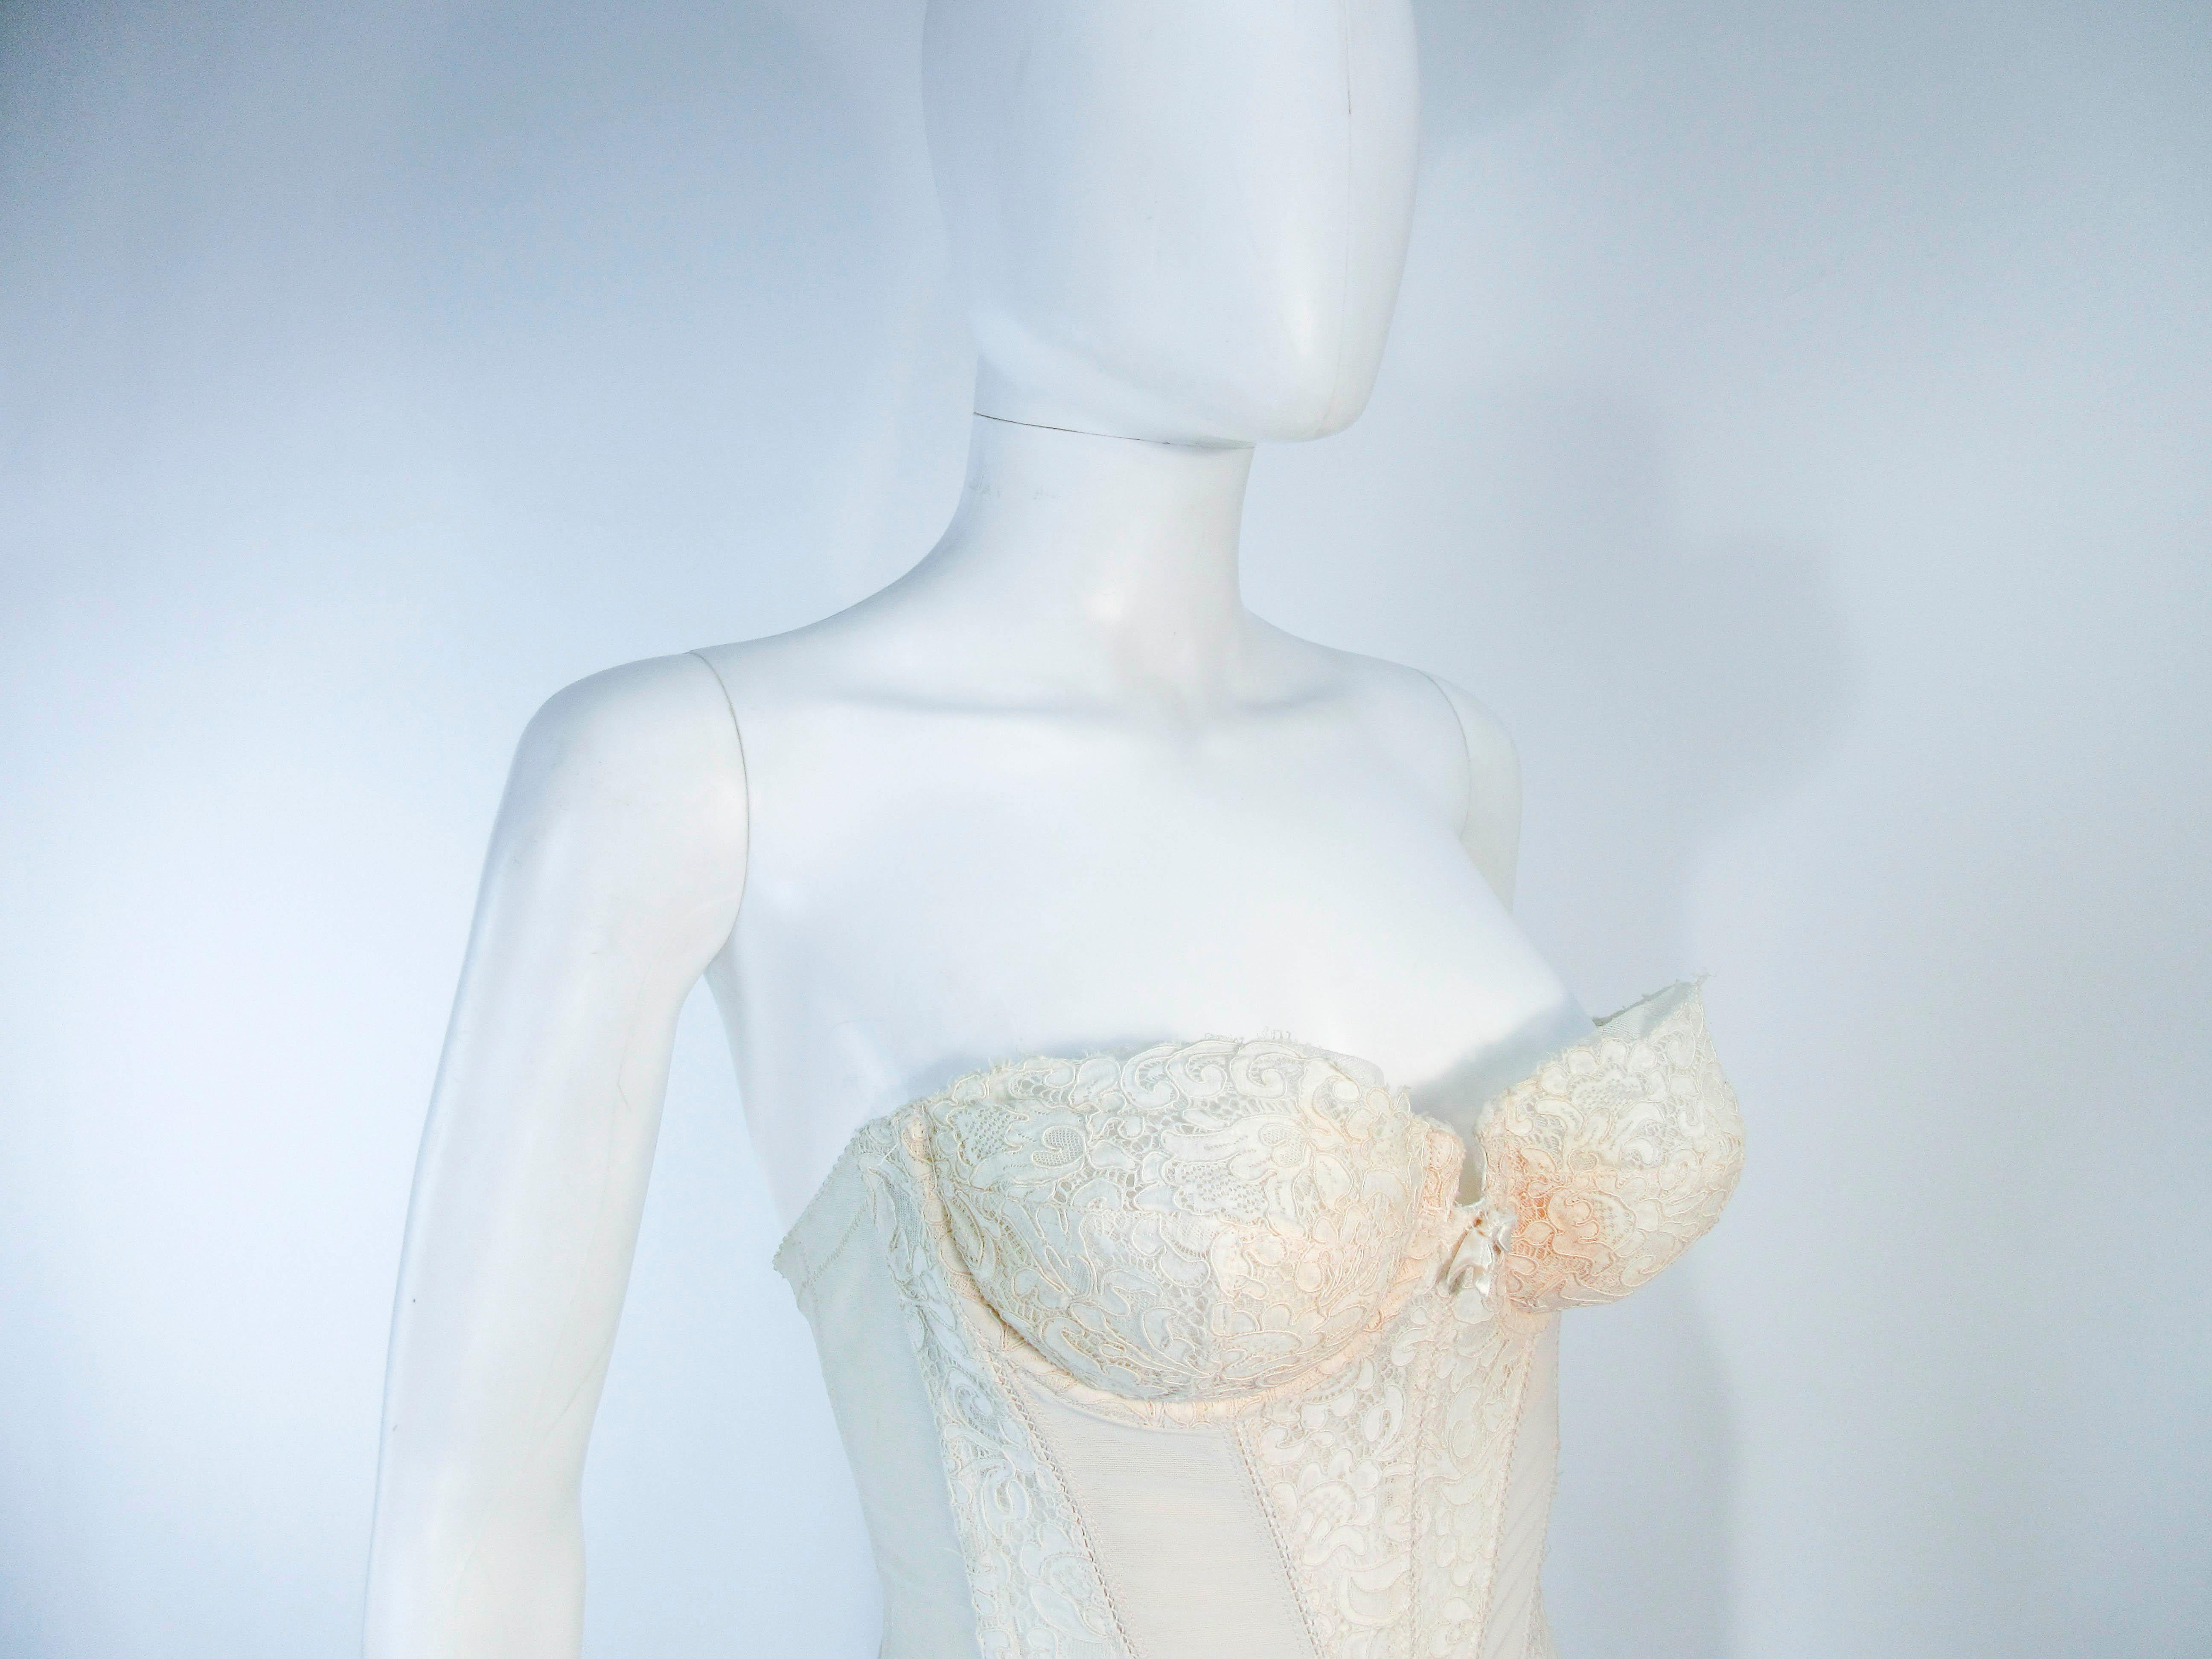 Gray WARNER IMPORTS CHAMPS-ELYSESS COLLECTION White Merry Widow Size 35